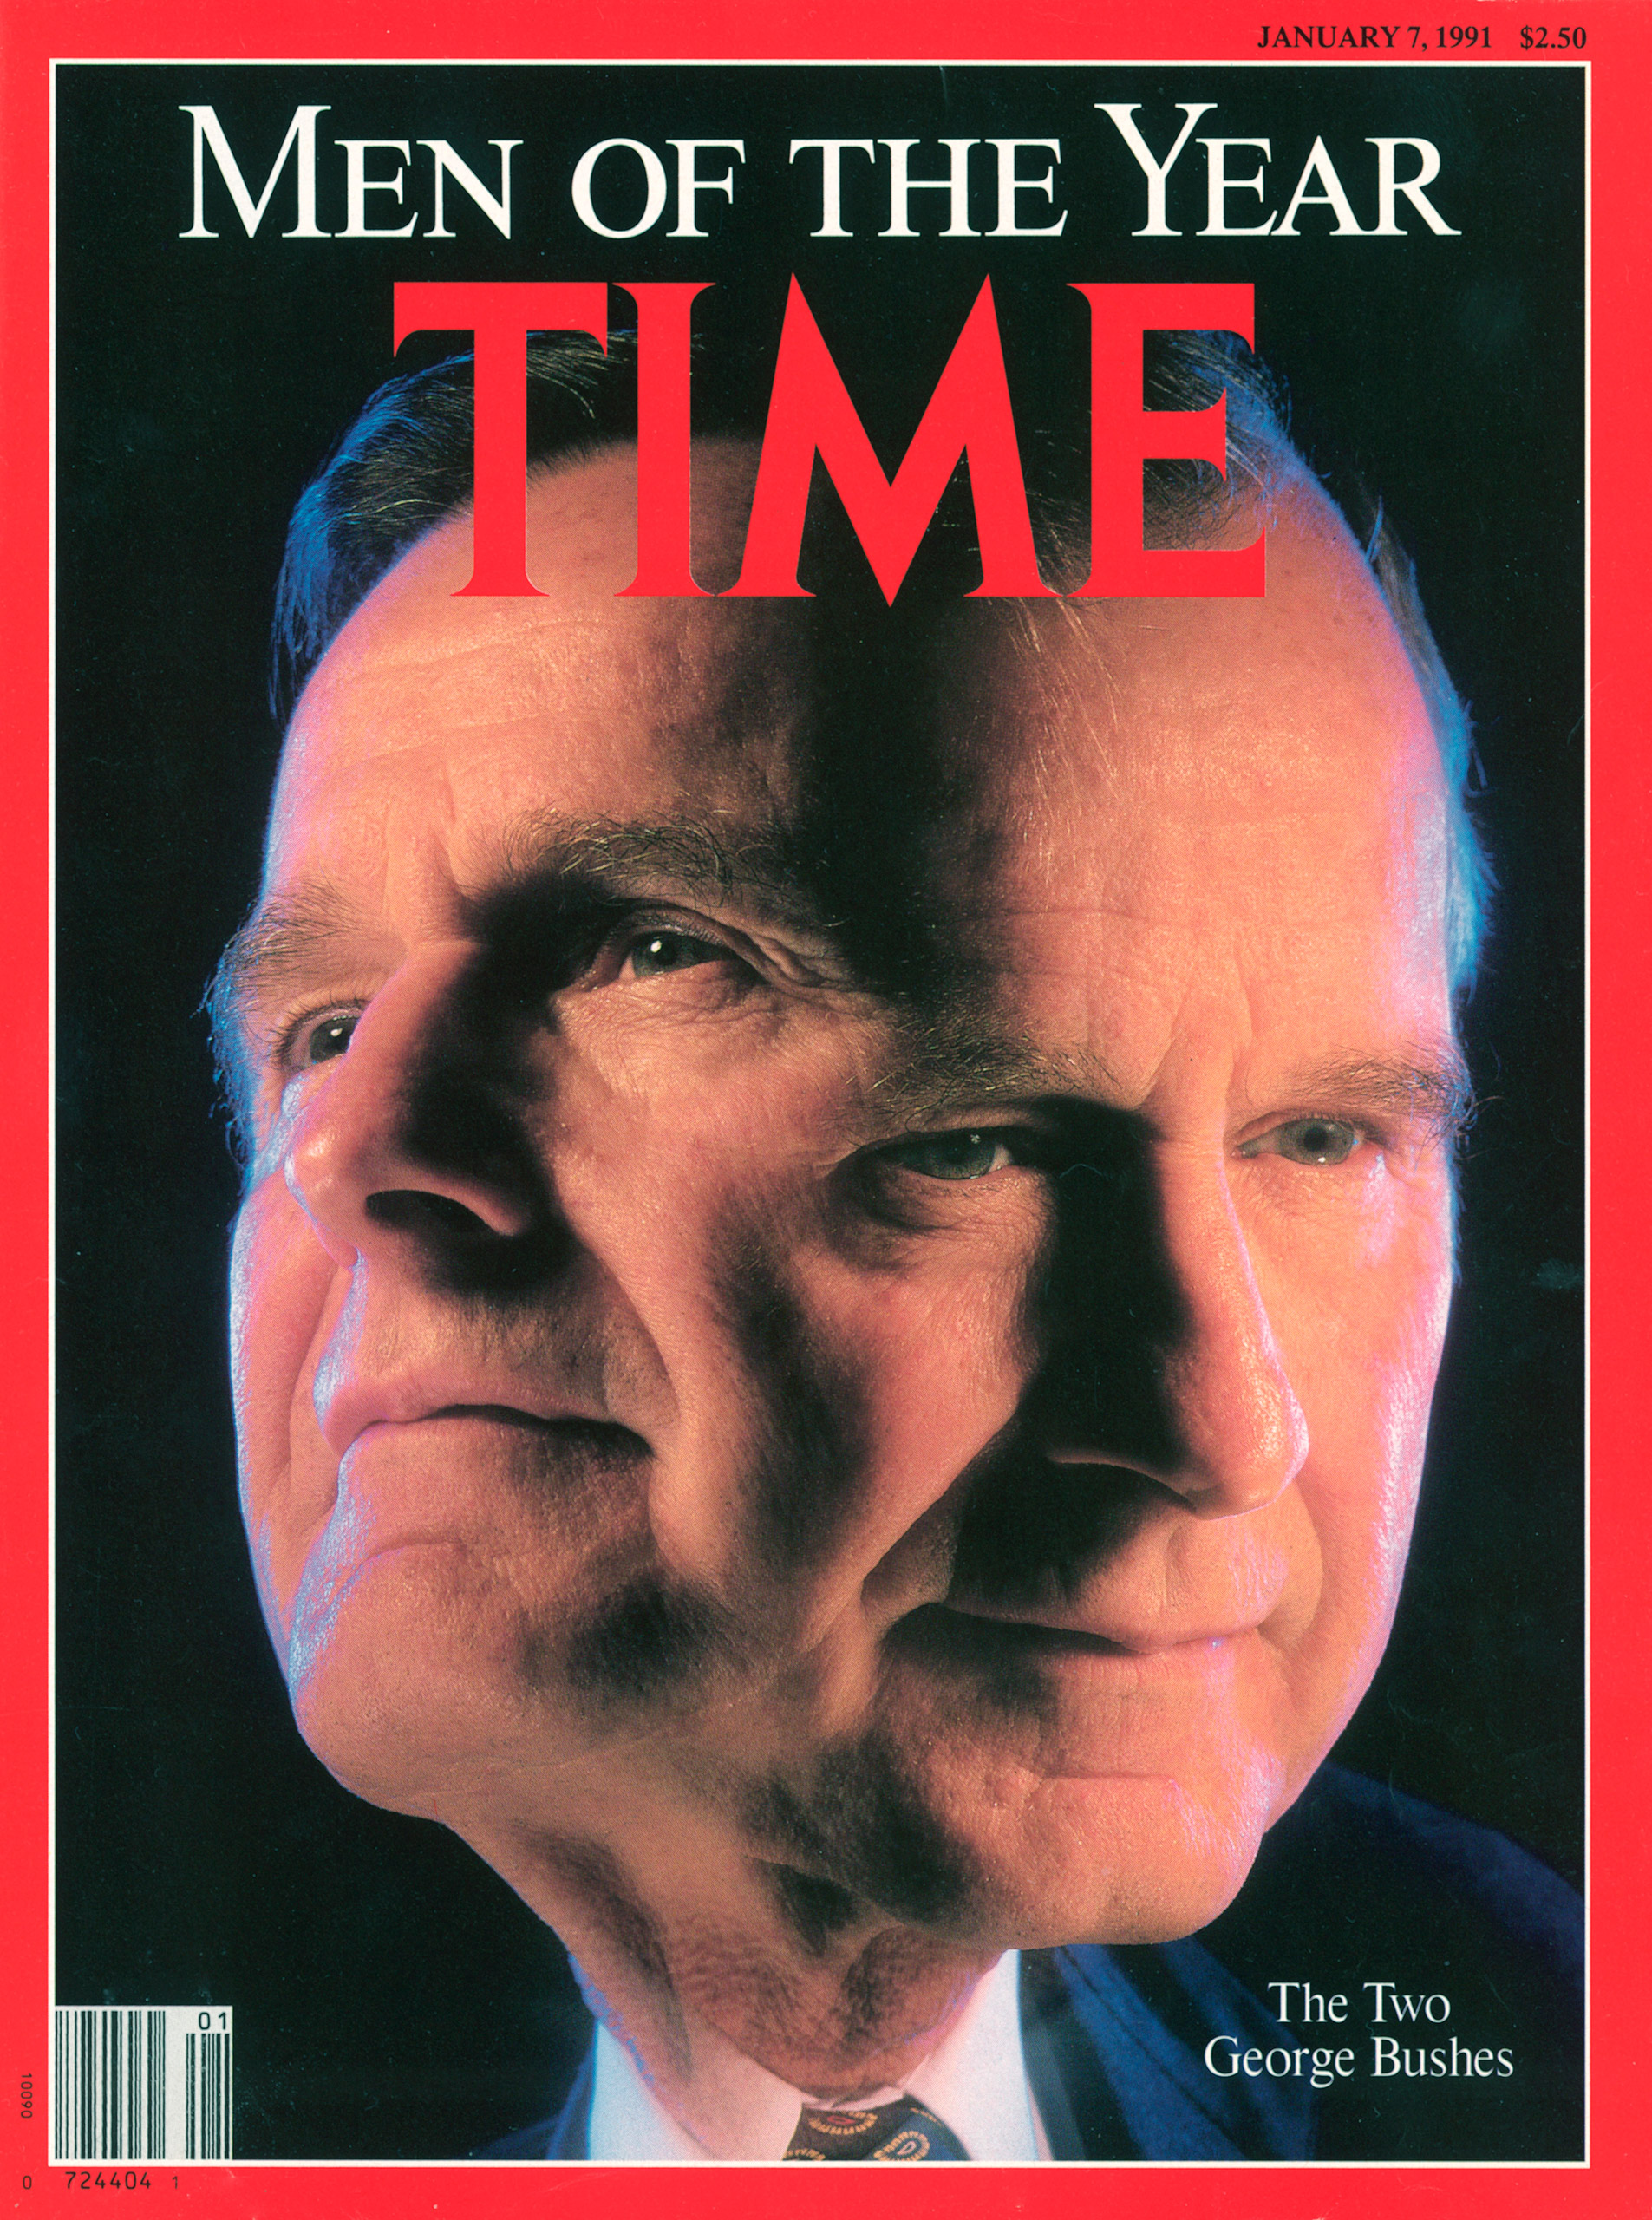 George H.W. Bush, Men of the Year, on the Jan. 7, 1991, cover of TIME. Cover photo by Gregory Heisler.